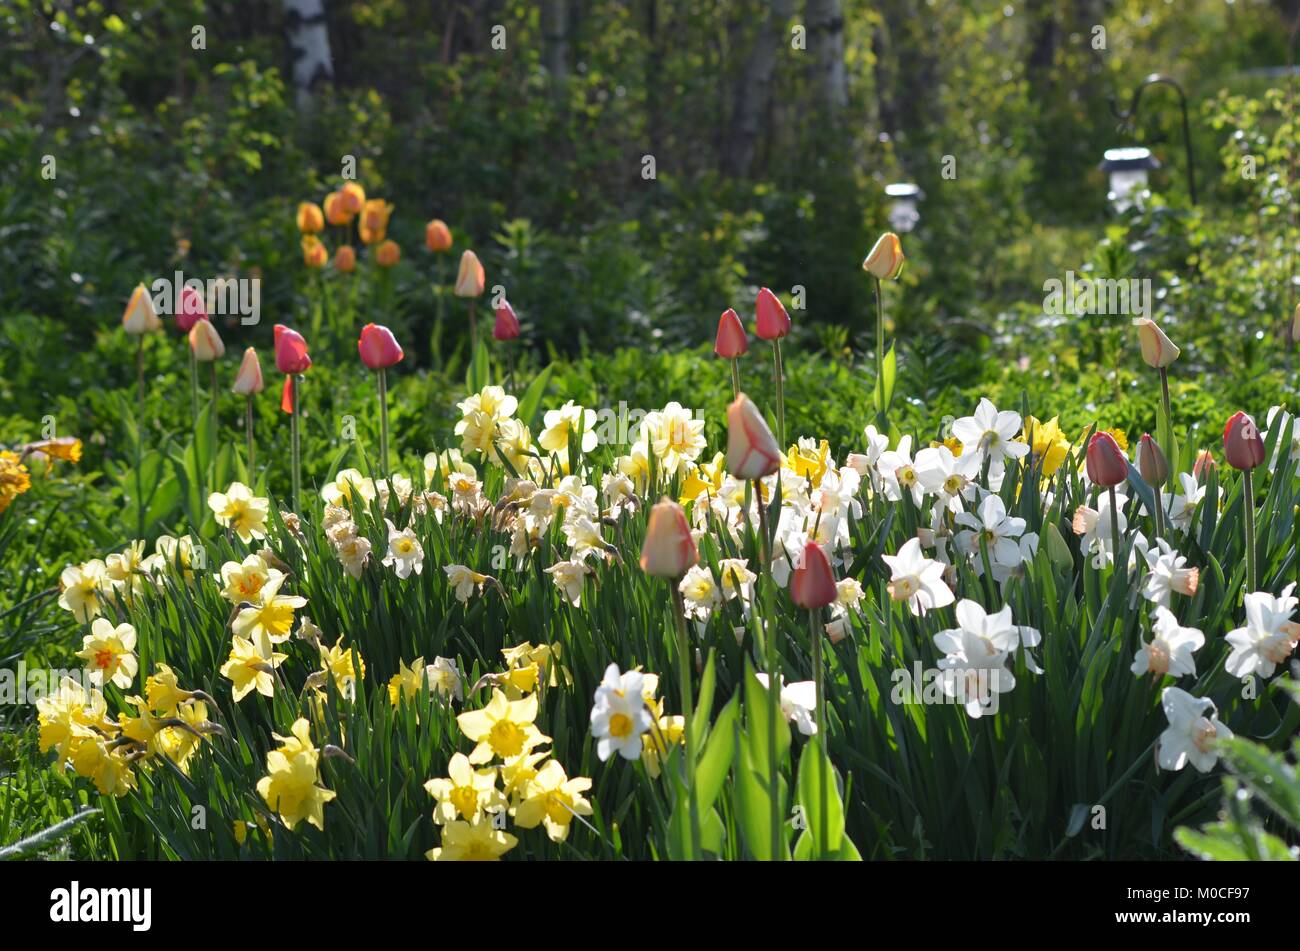 A fresh blooming flower garden full of bright and colorful spring tulips and daffodils dancing in the sunlight Stock Photo